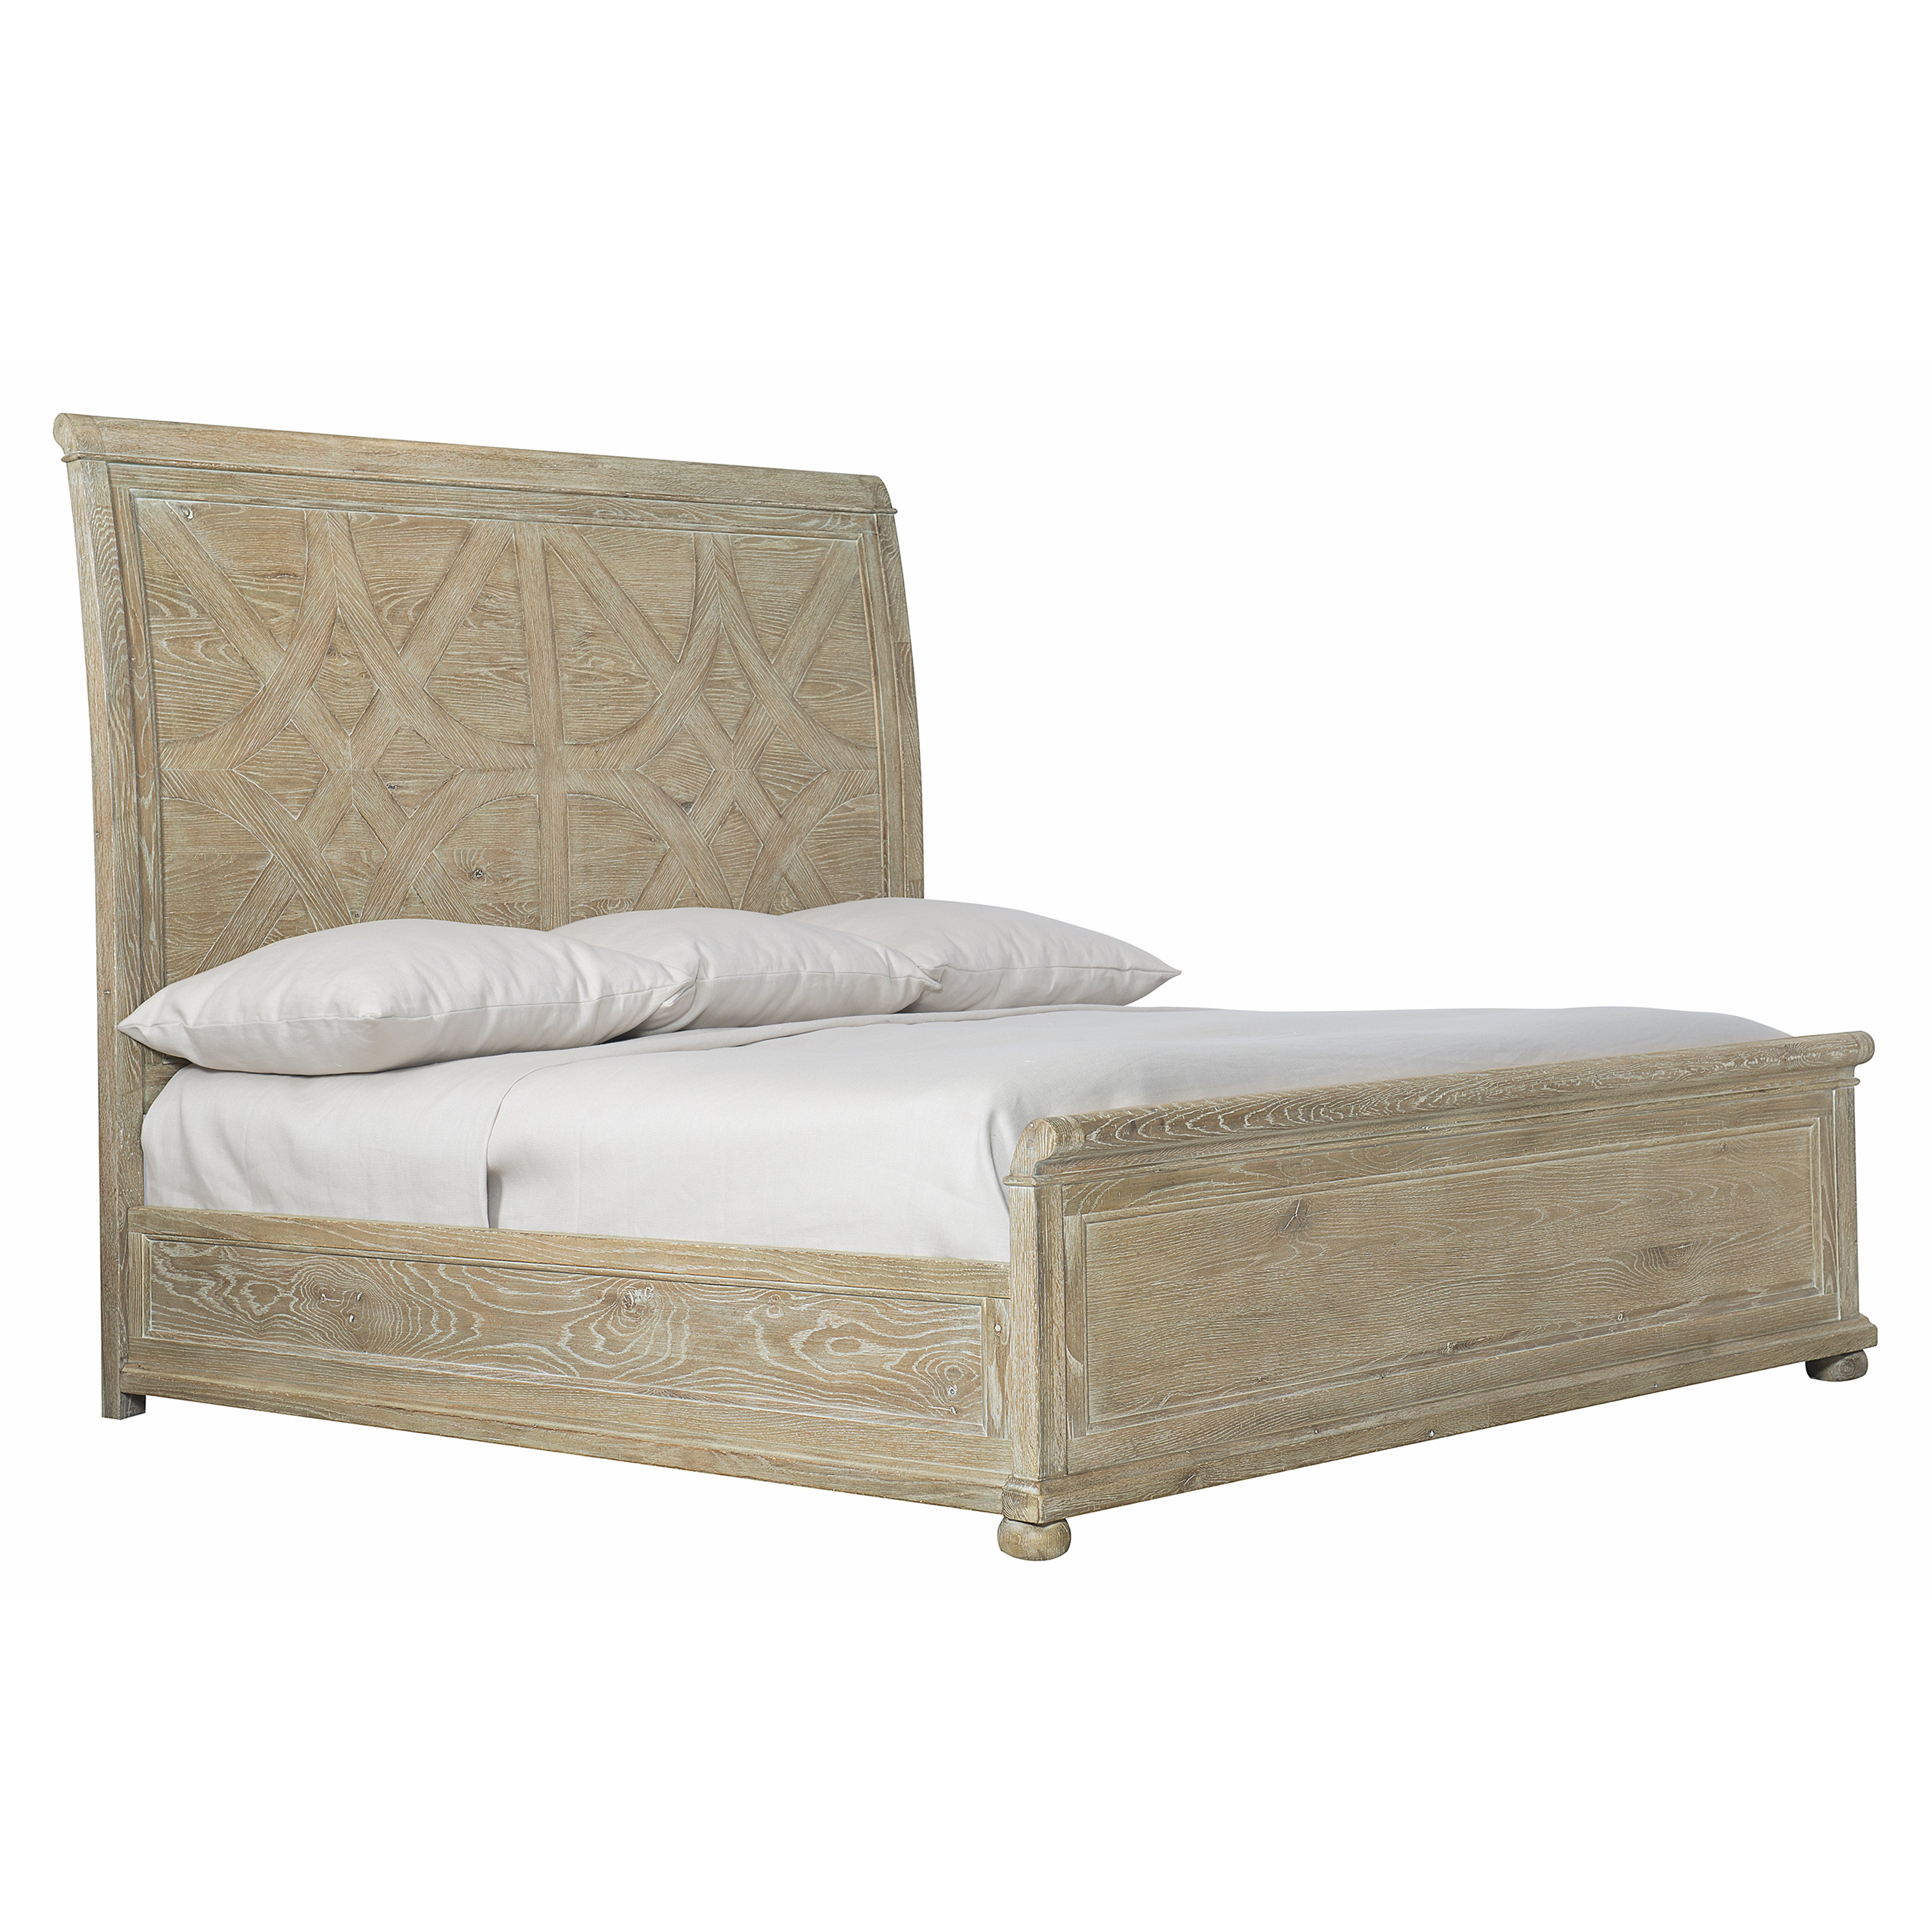 Rustic Patina King Panel Bed in Sand Finish